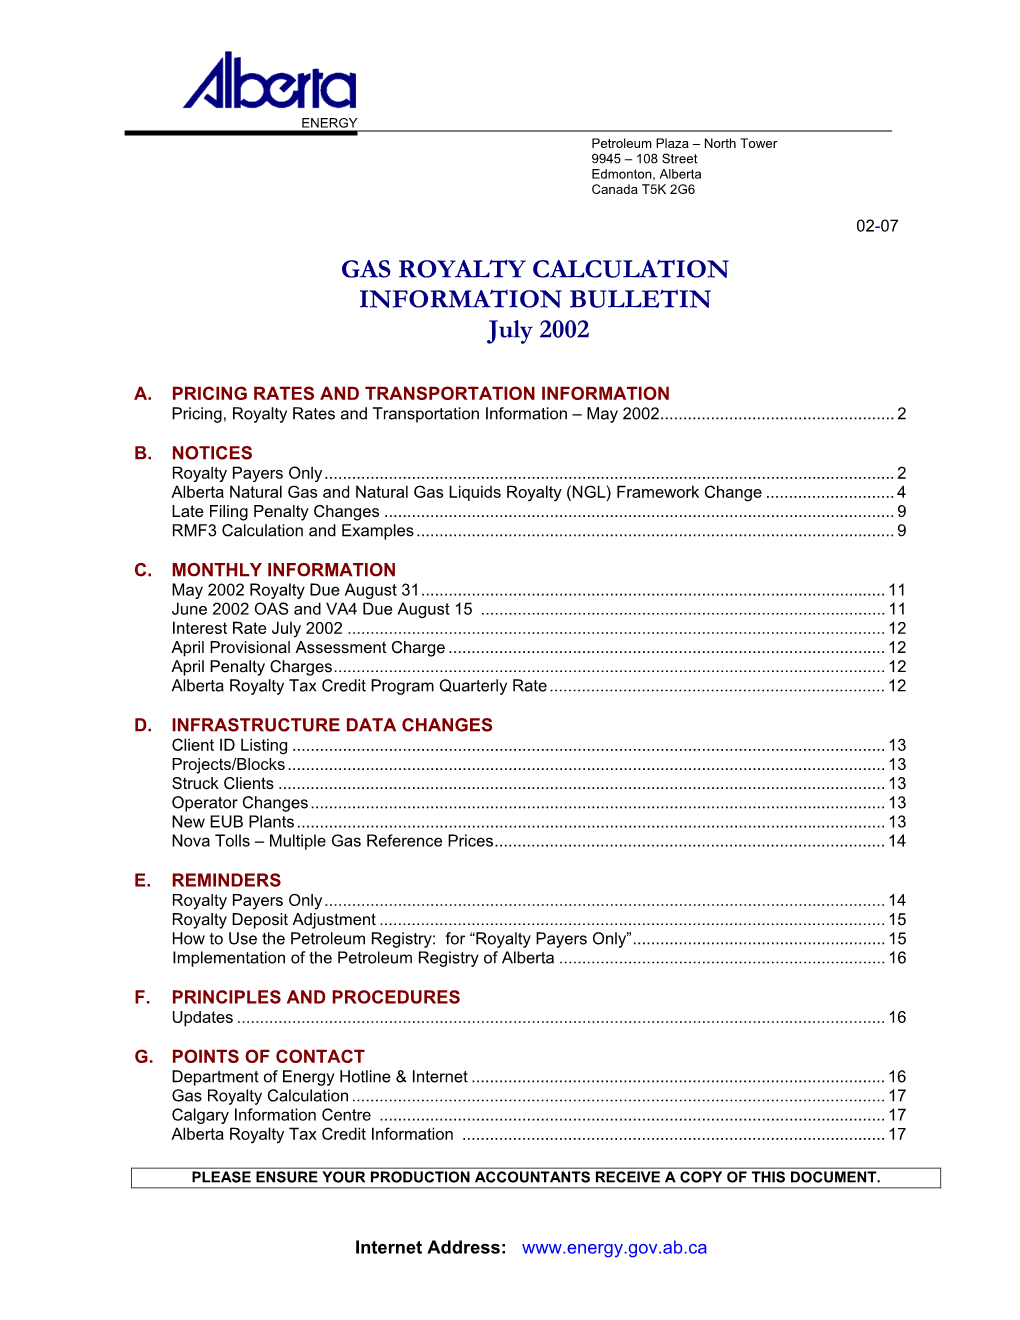 GAS ROYALTY CALCULATION INFORMATION BULLETIN July 2002